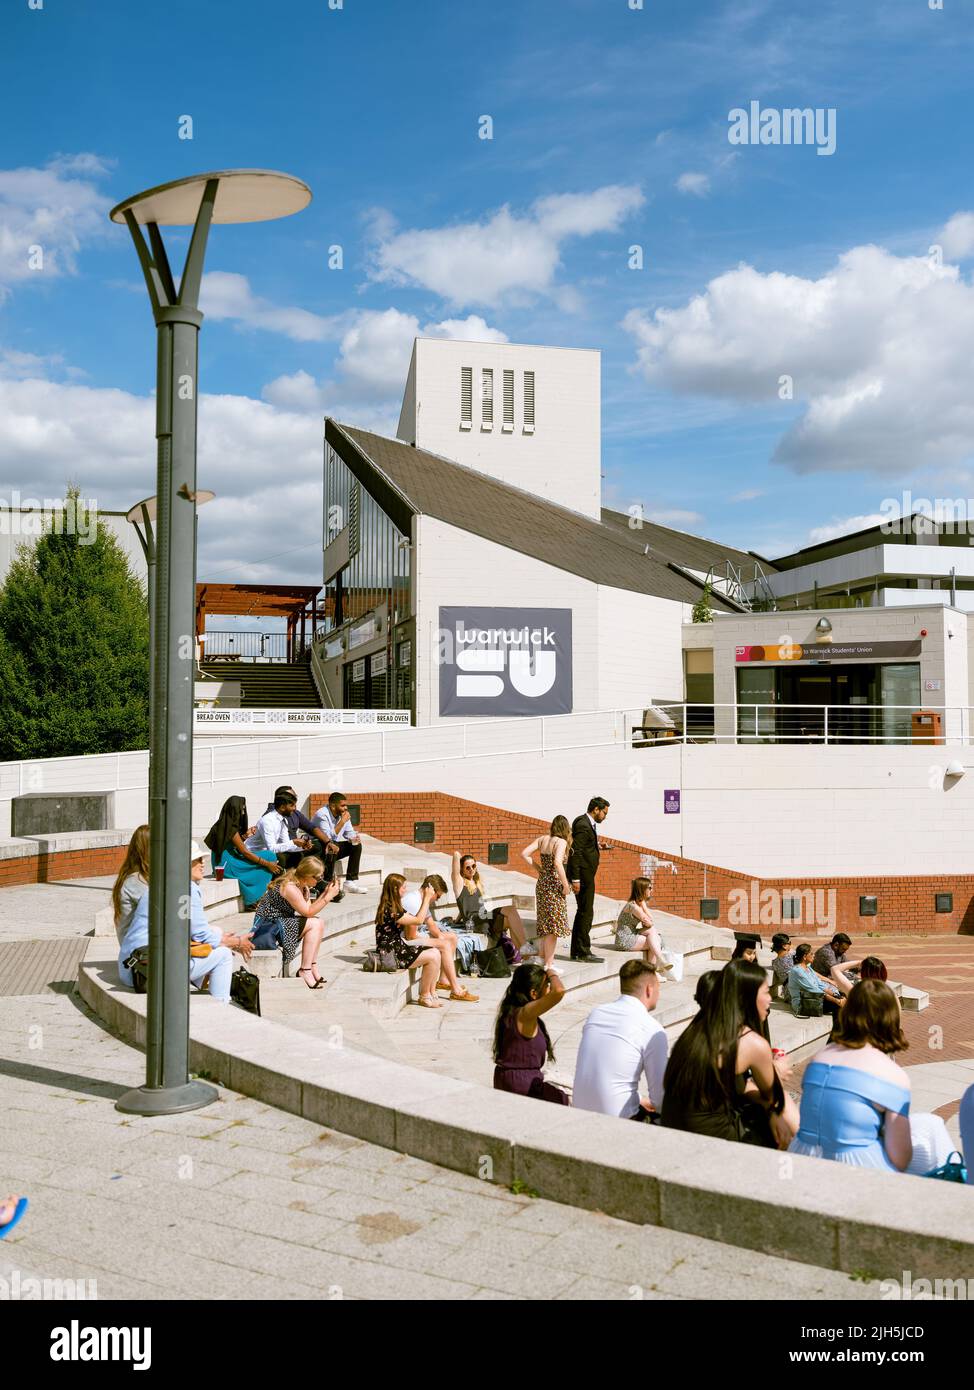 University of Warwick, Coventry, UK. The central university square, or plaza where students often sit in the amphitheatre design. Stock Photo